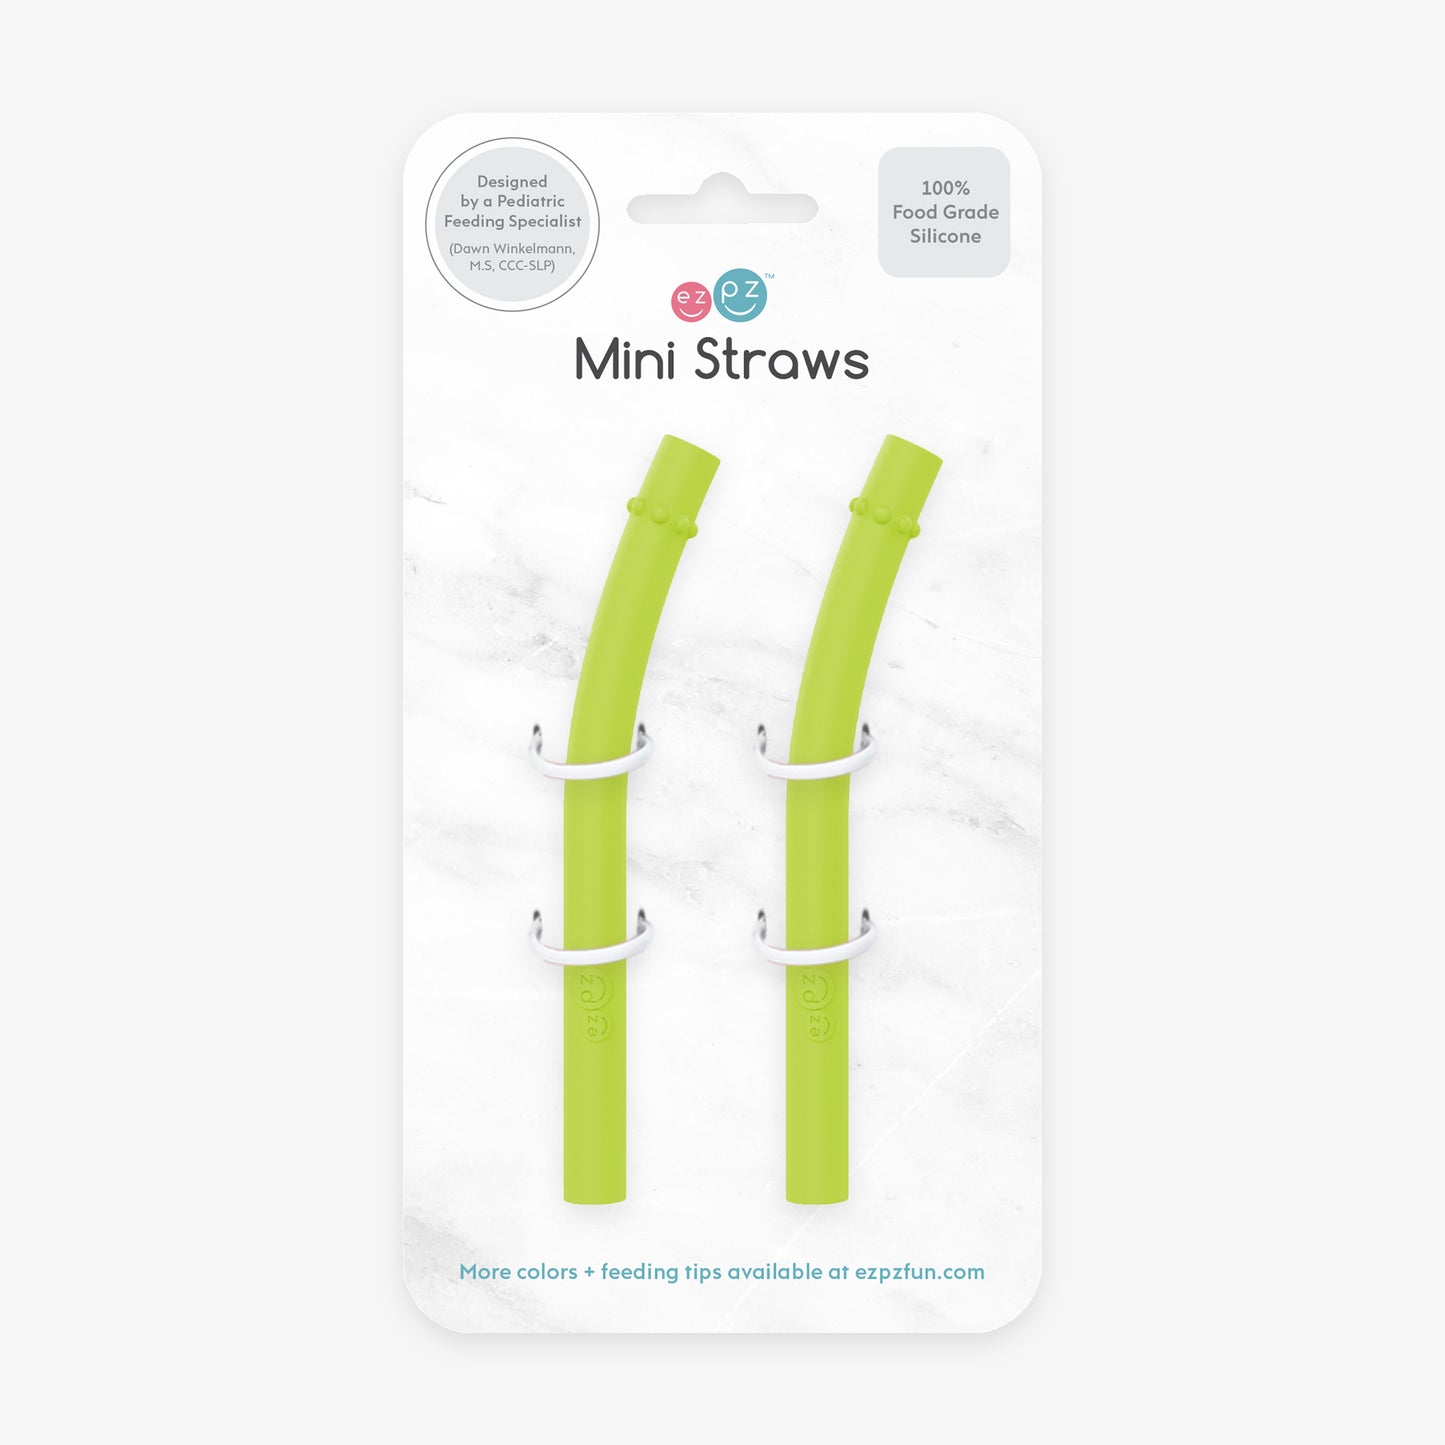 Mini Straws in Lime / Silicone Straw Replacement Pack for the ezpz Mini Cup & Straw System